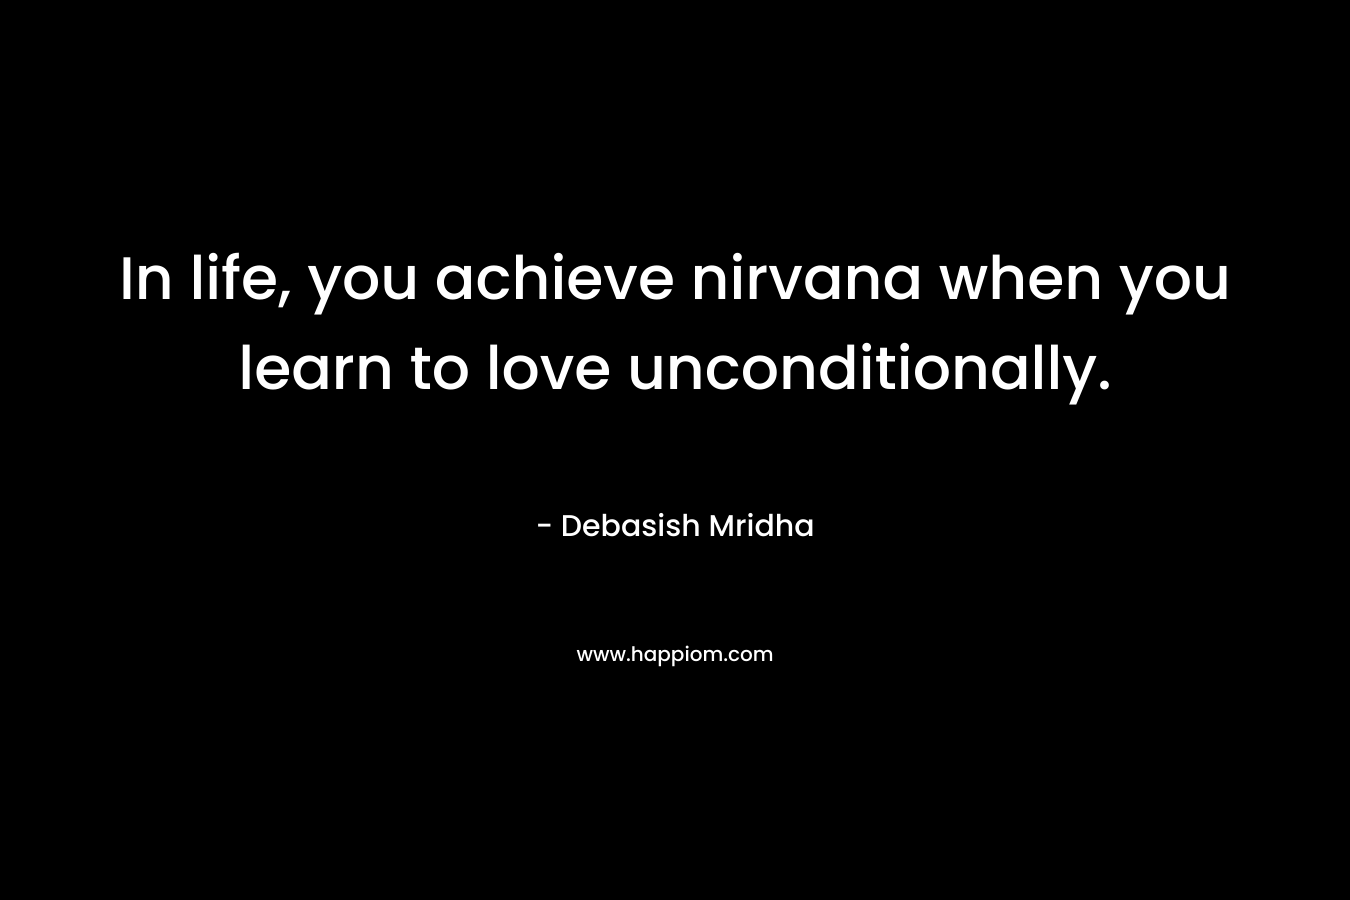 In life, you achieve nirvana when you learn to love unconditionally.